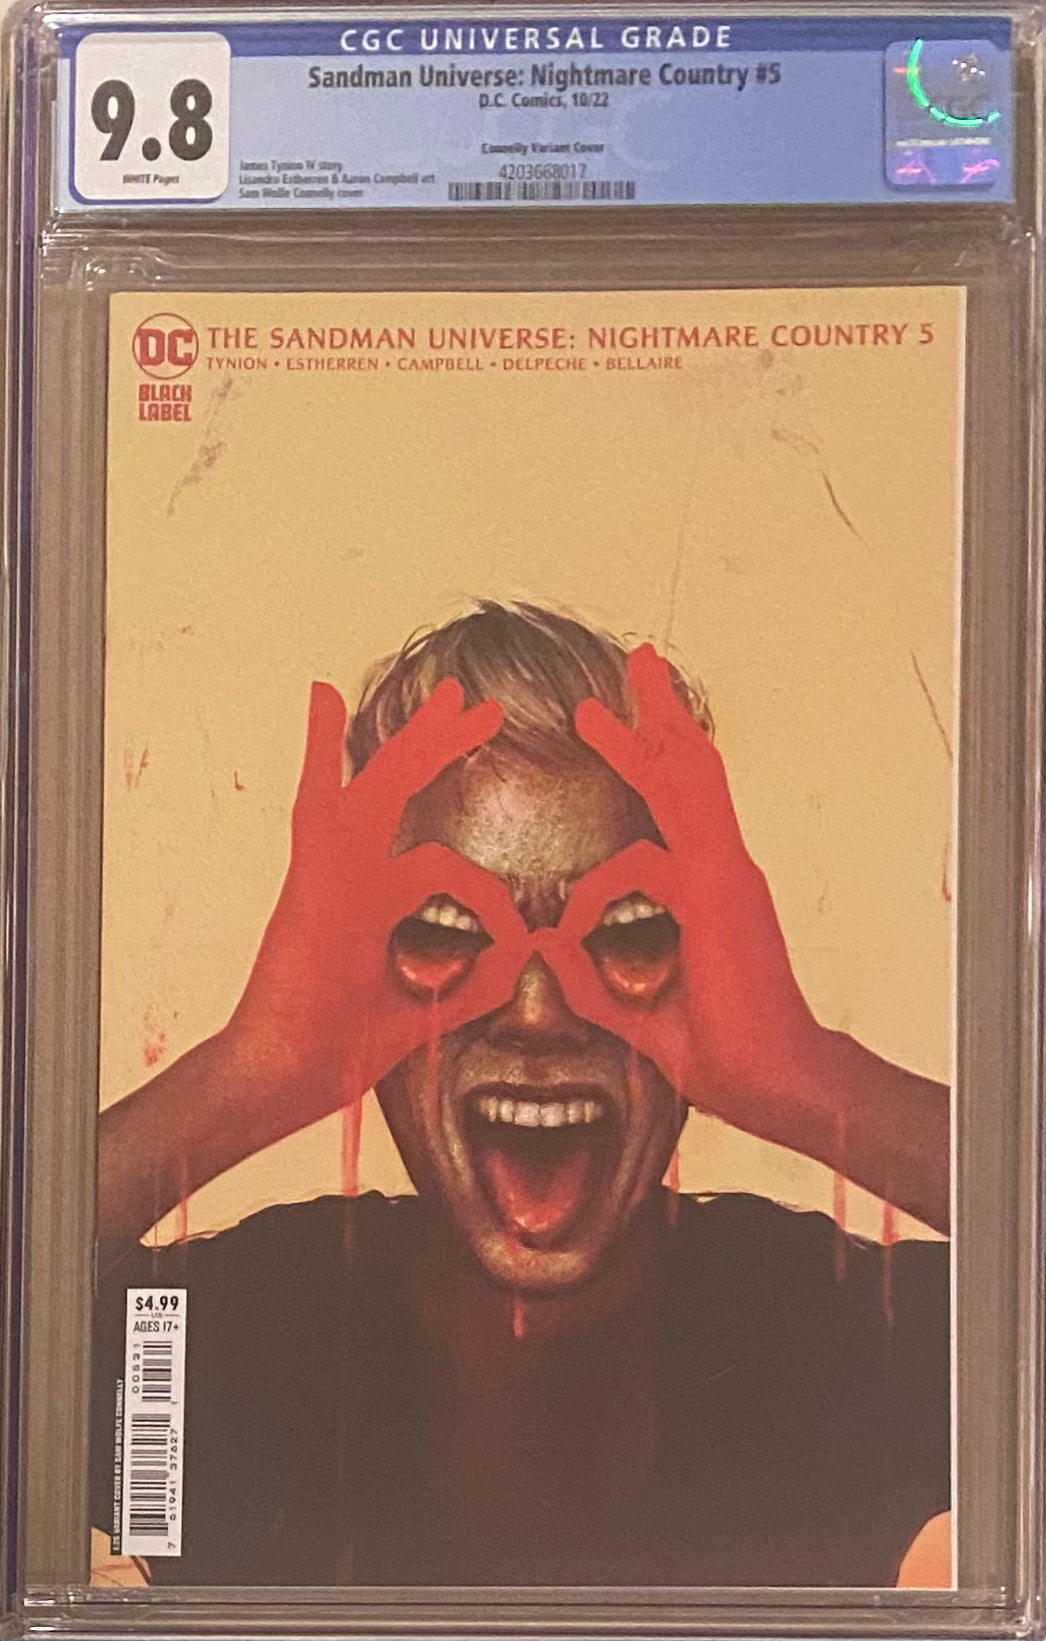 Sandman Universe: Nightmare Country #5 Connelly 1:25 Retailer Incentive Variant DC Black Label CGC 9.8